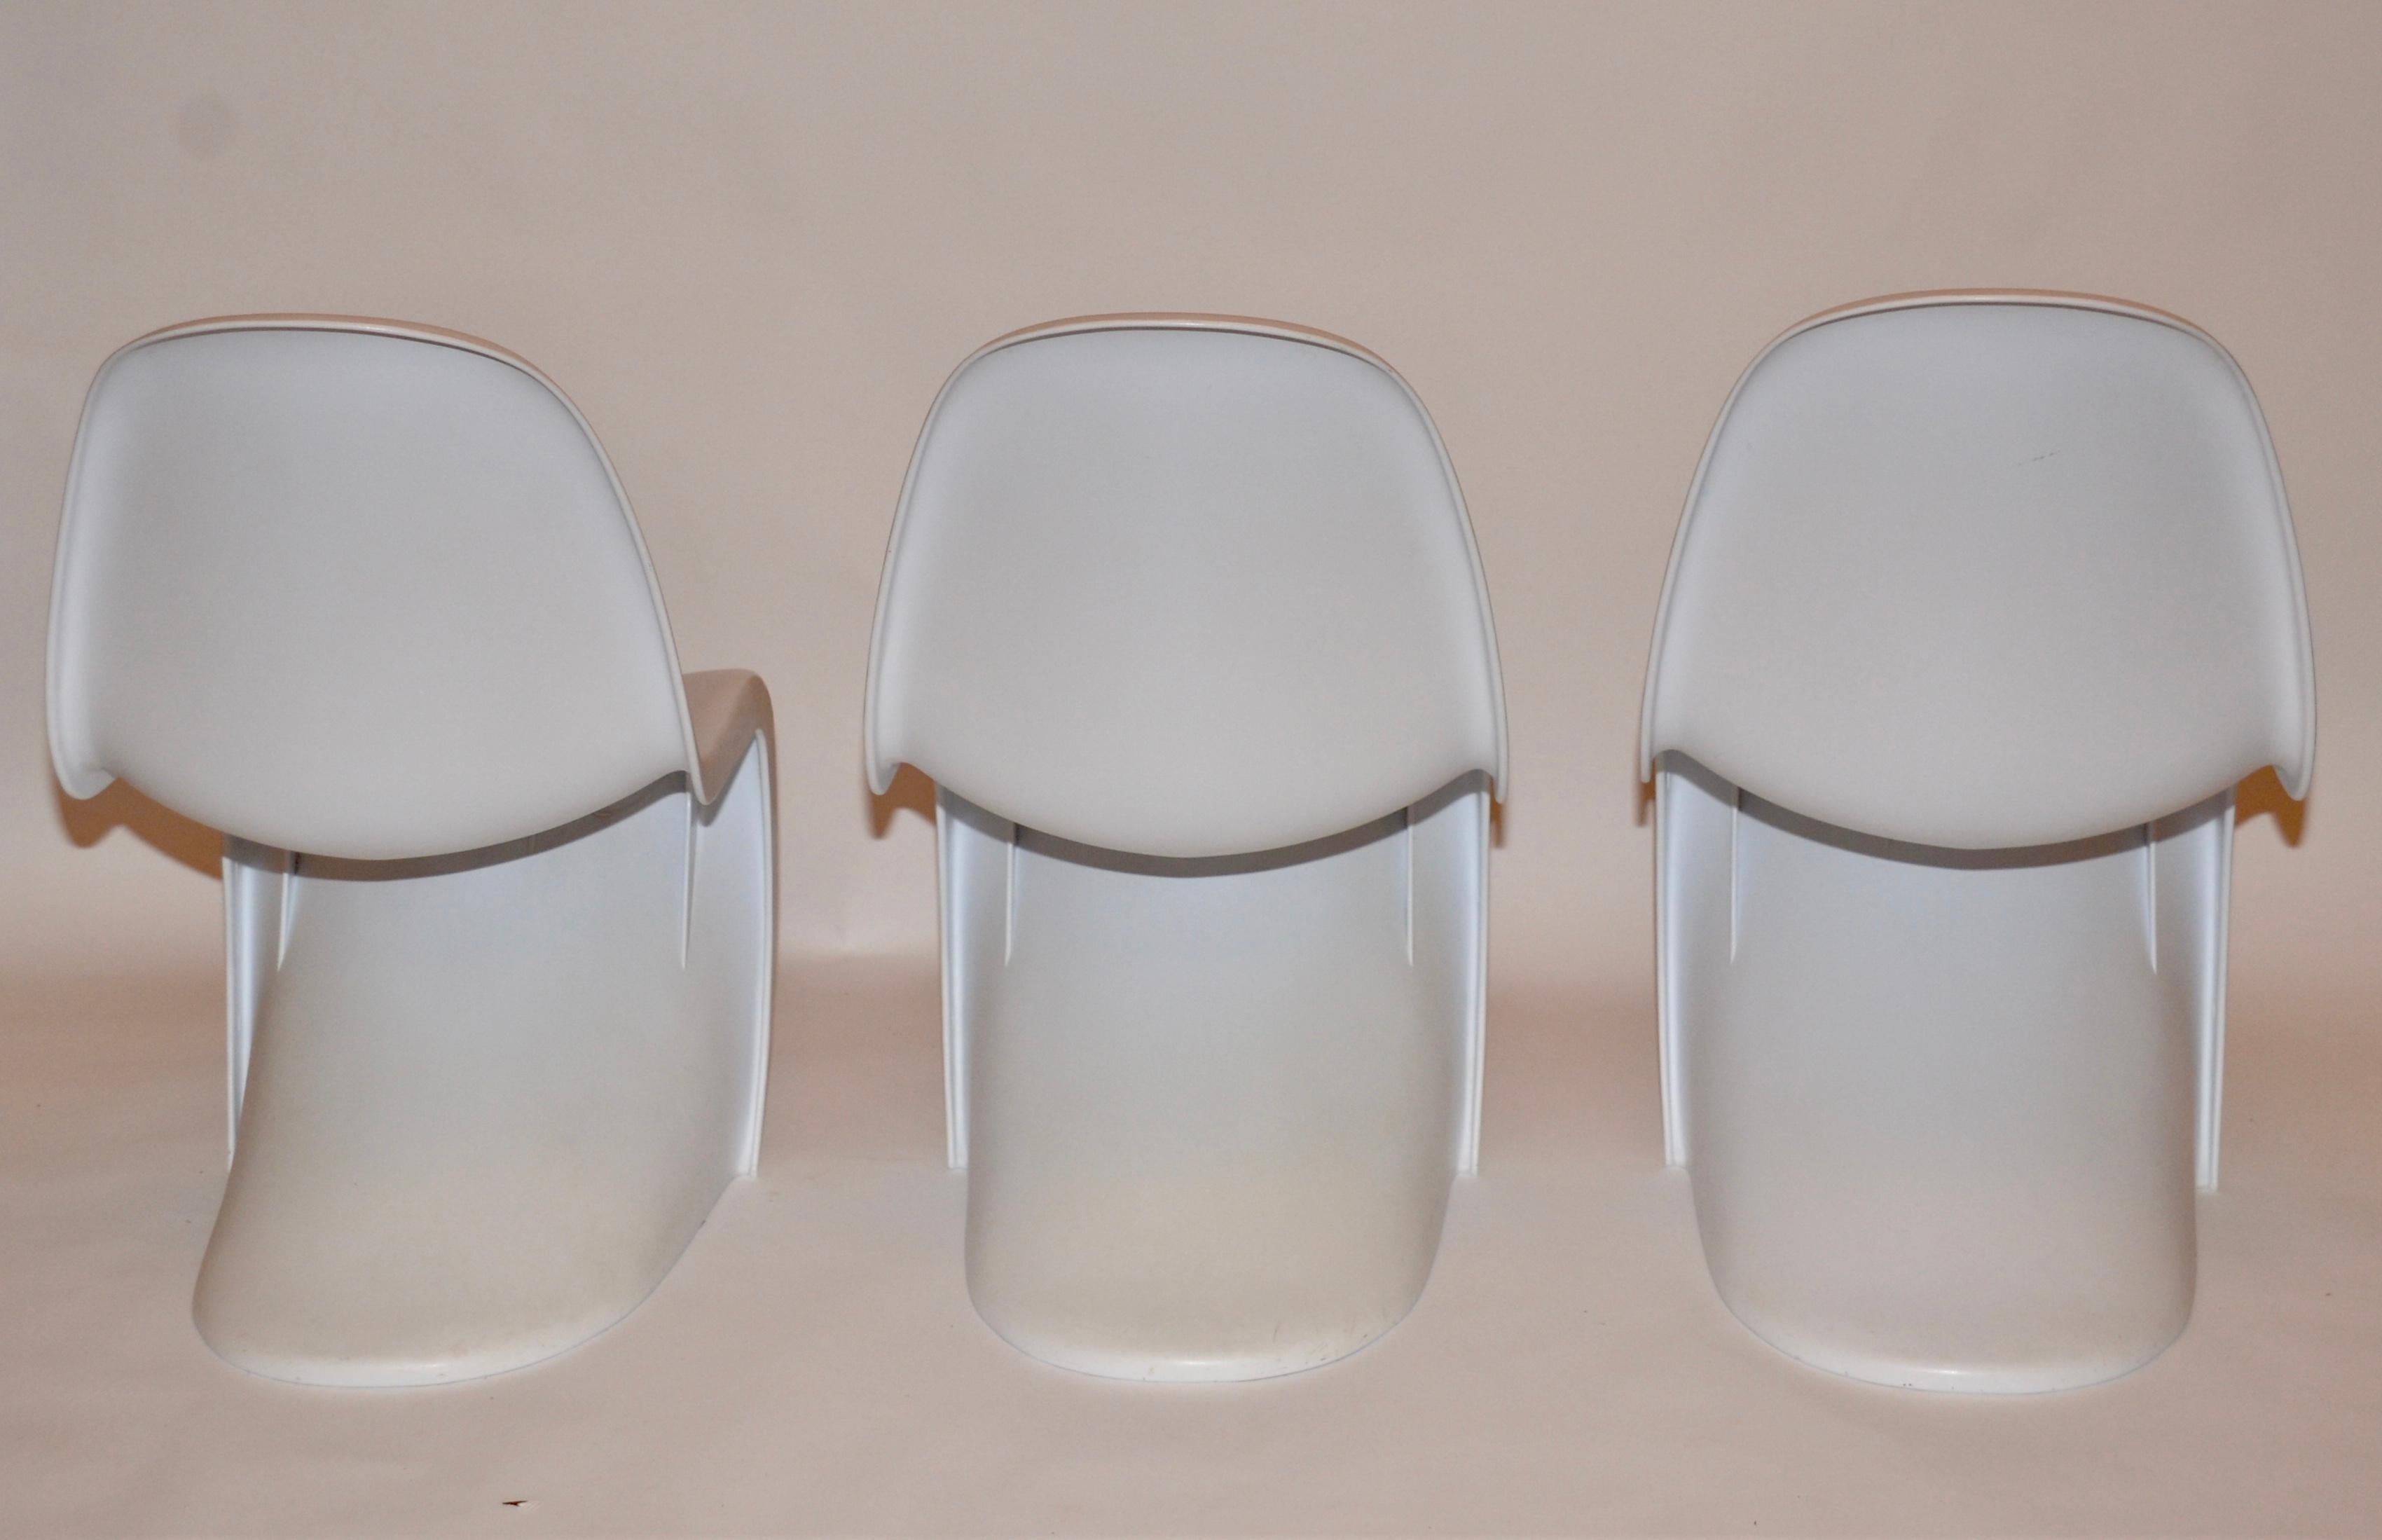 European Set of Six Chairs in the Style of the Verner Panton S Chair